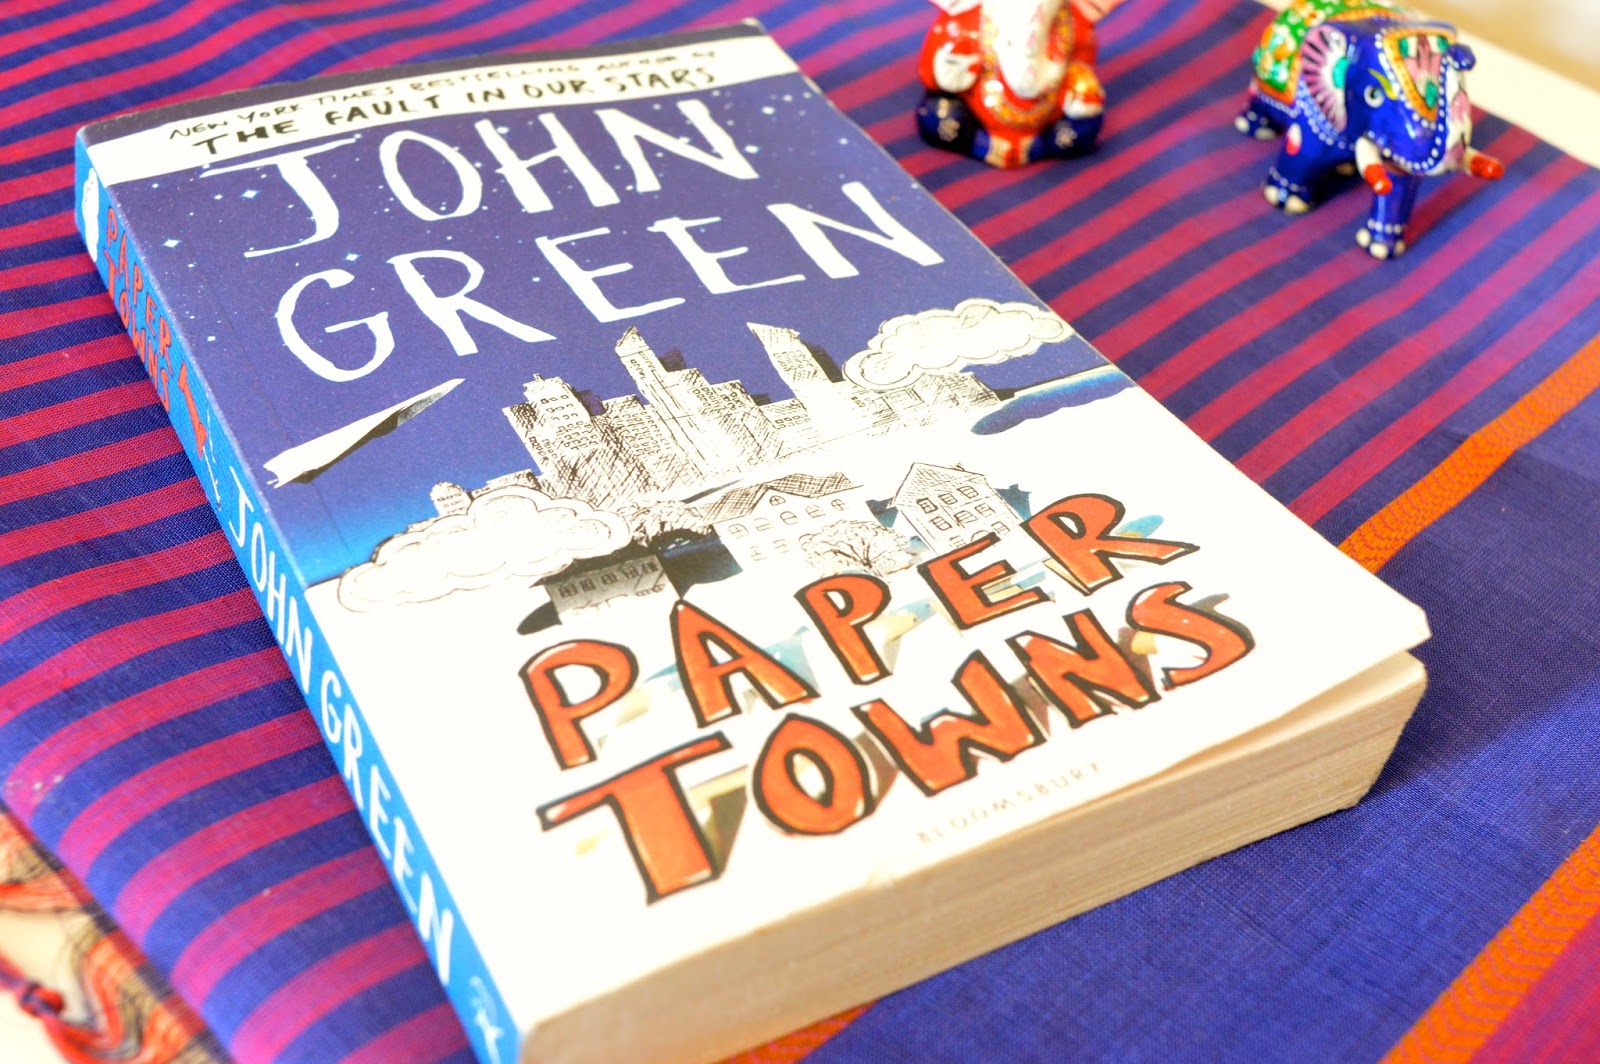 book review paper towns